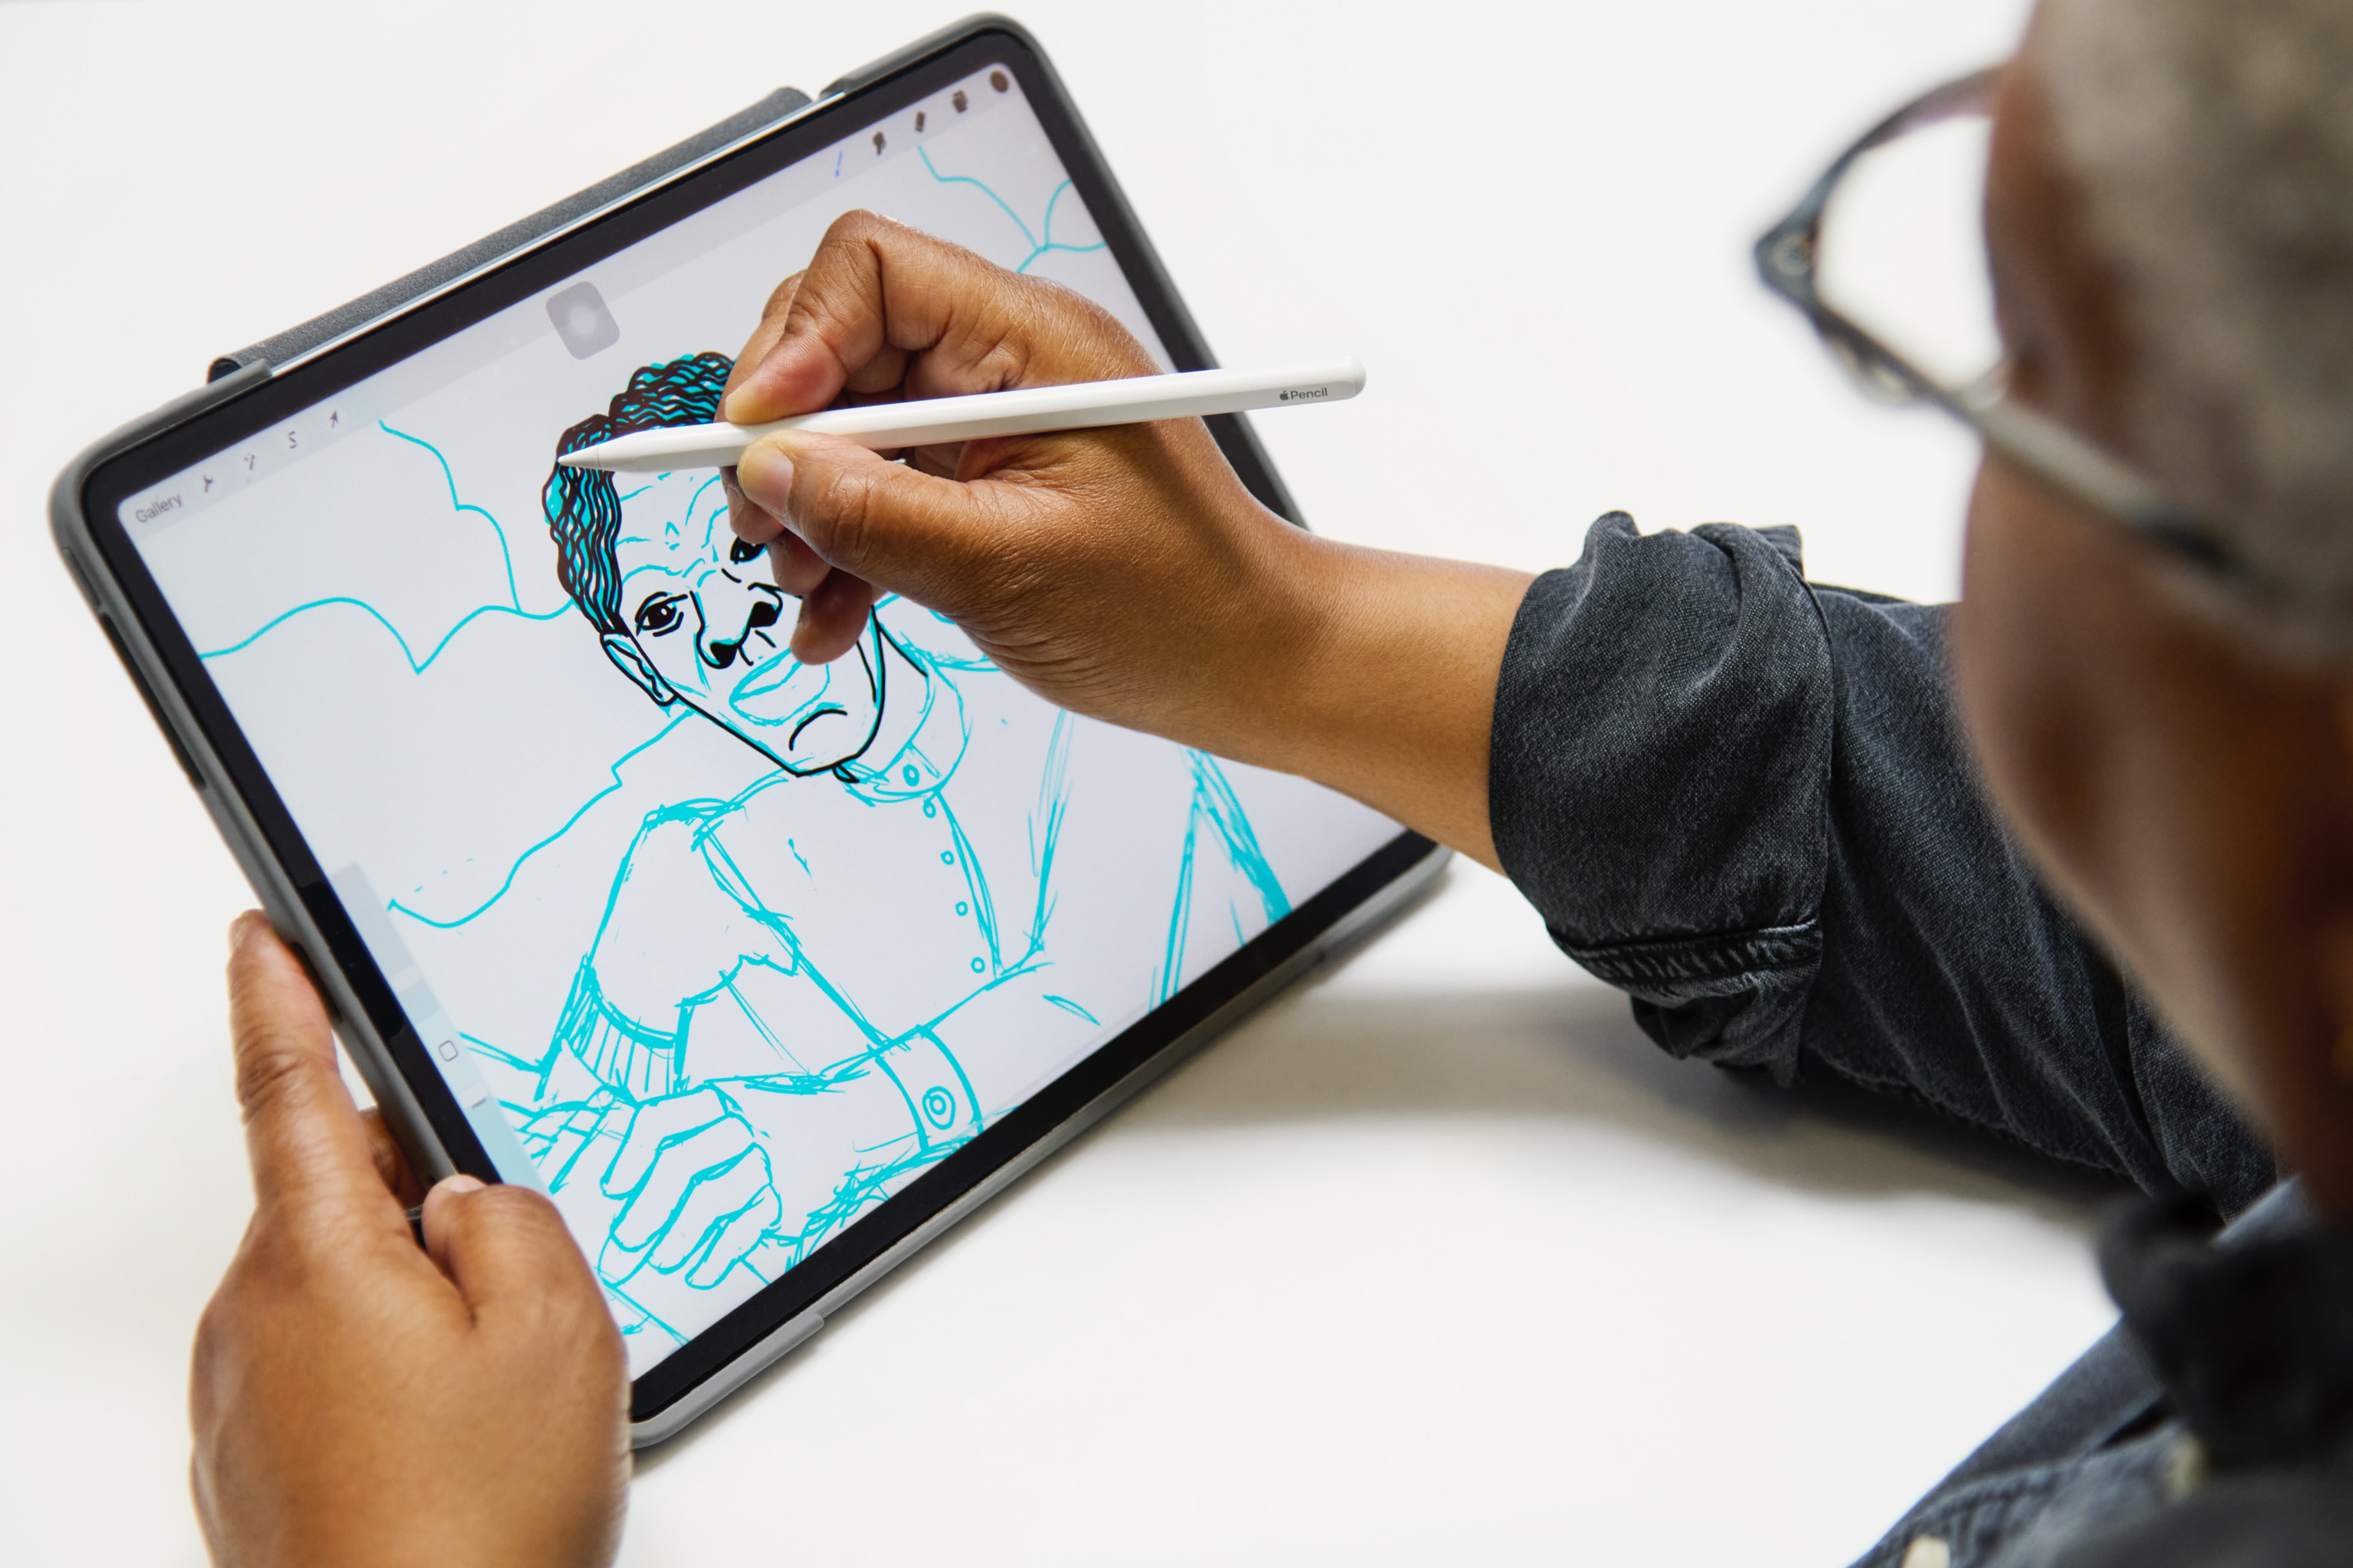 Chronicling the faces of Juneteenth with iPad Pro and Apple Pencil